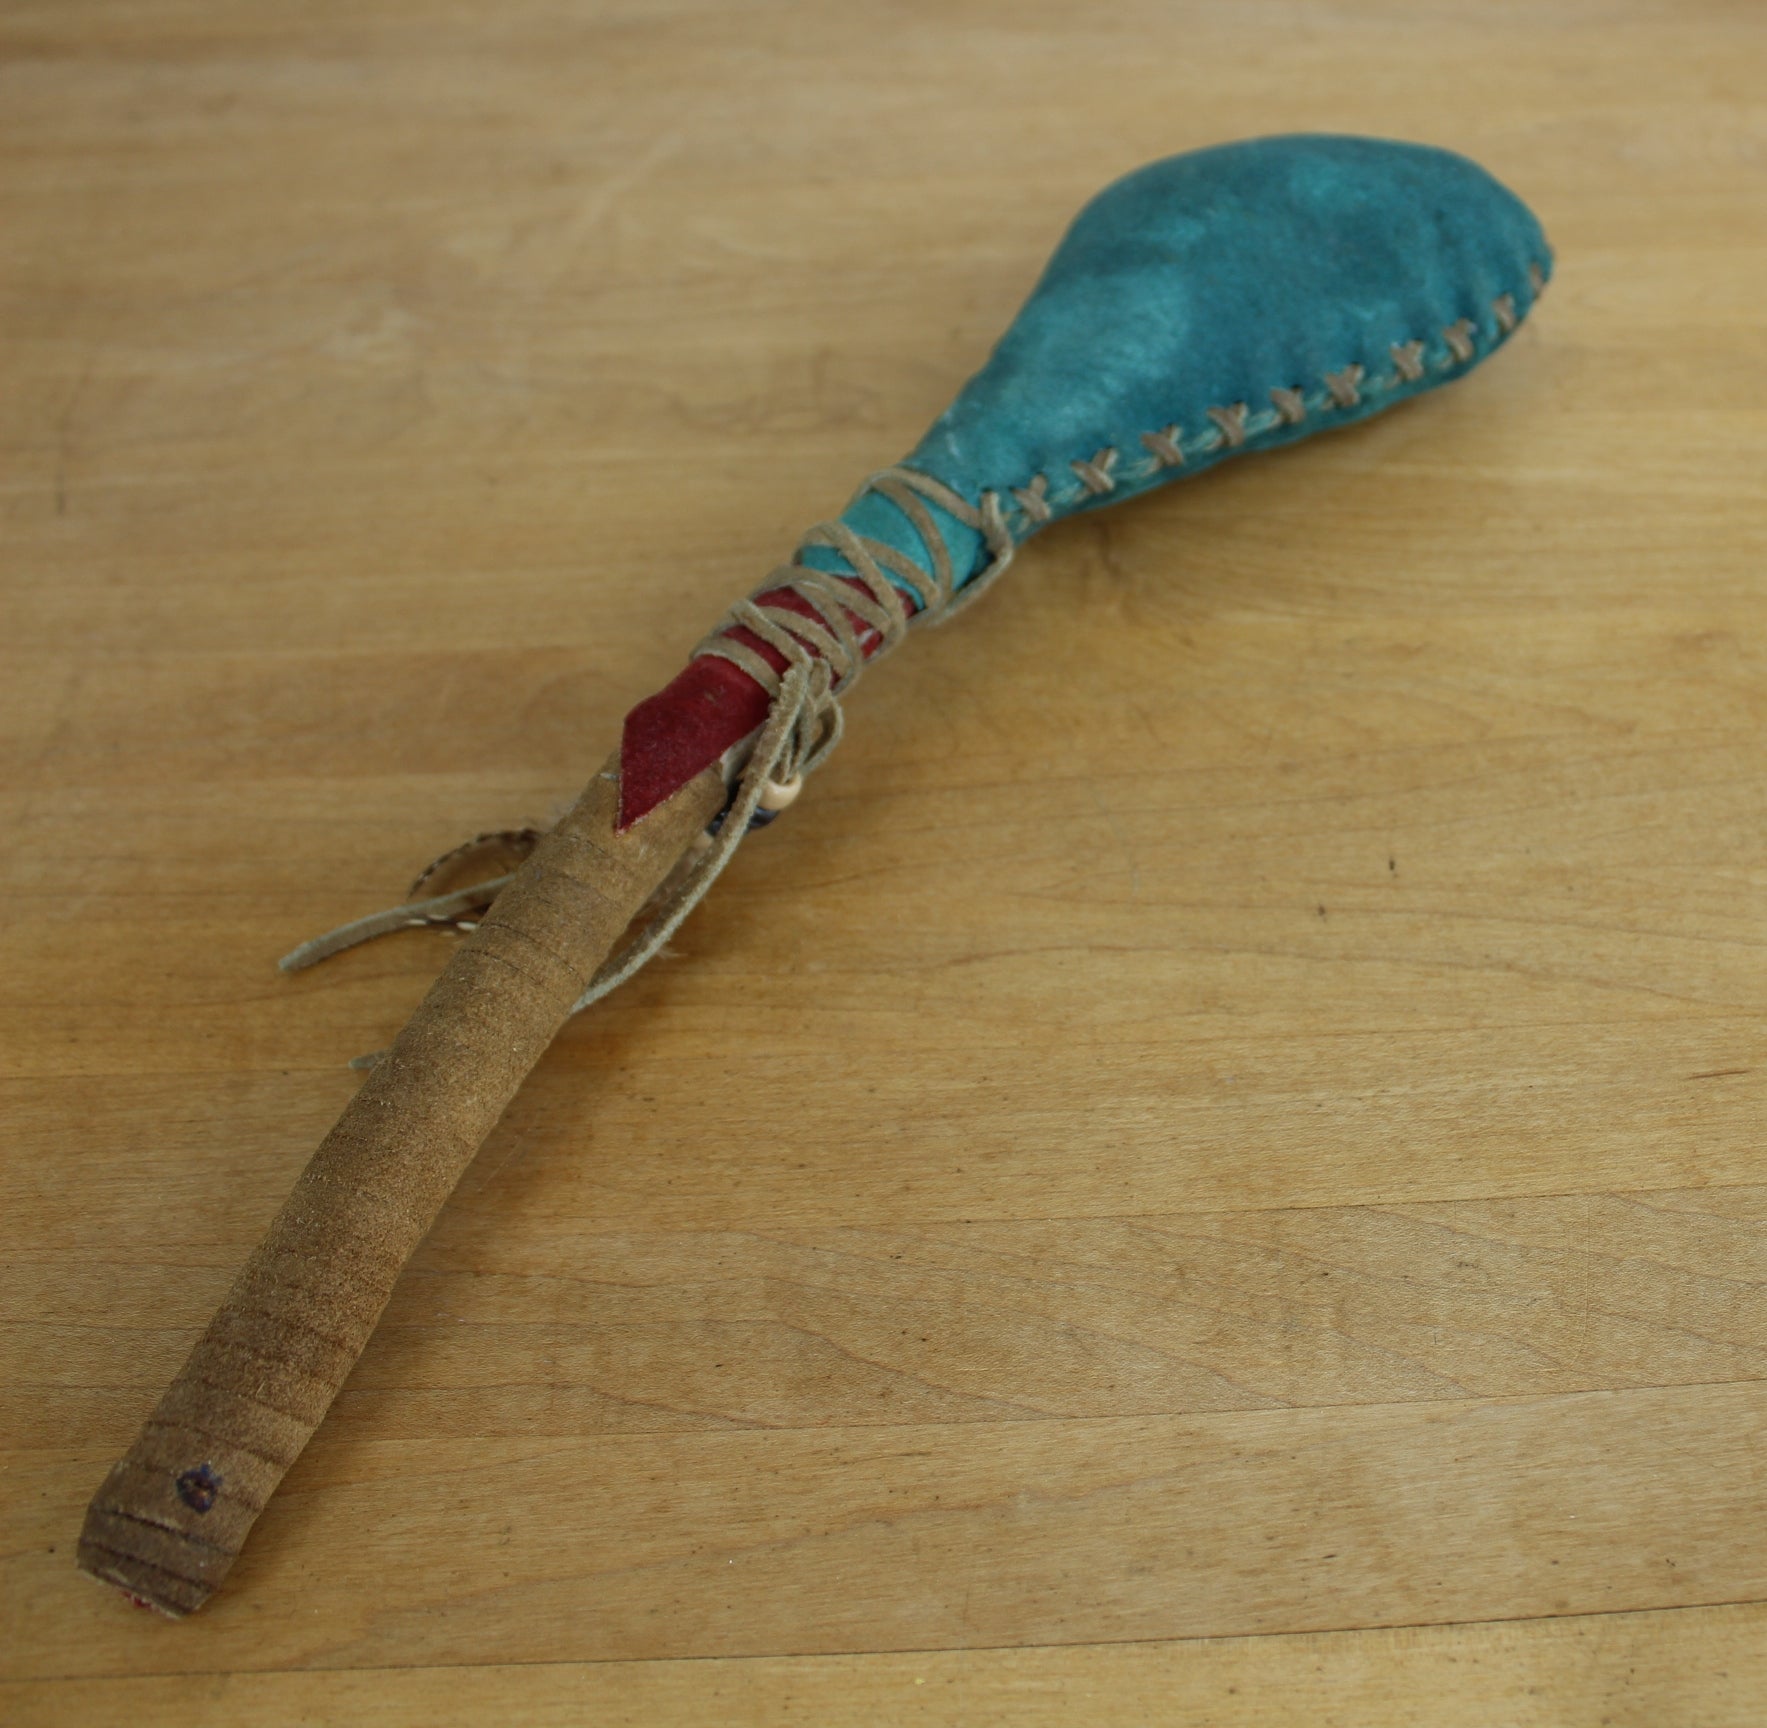 Native American Style Dance Rattler Shaker Turquoise Suede Feather Beads